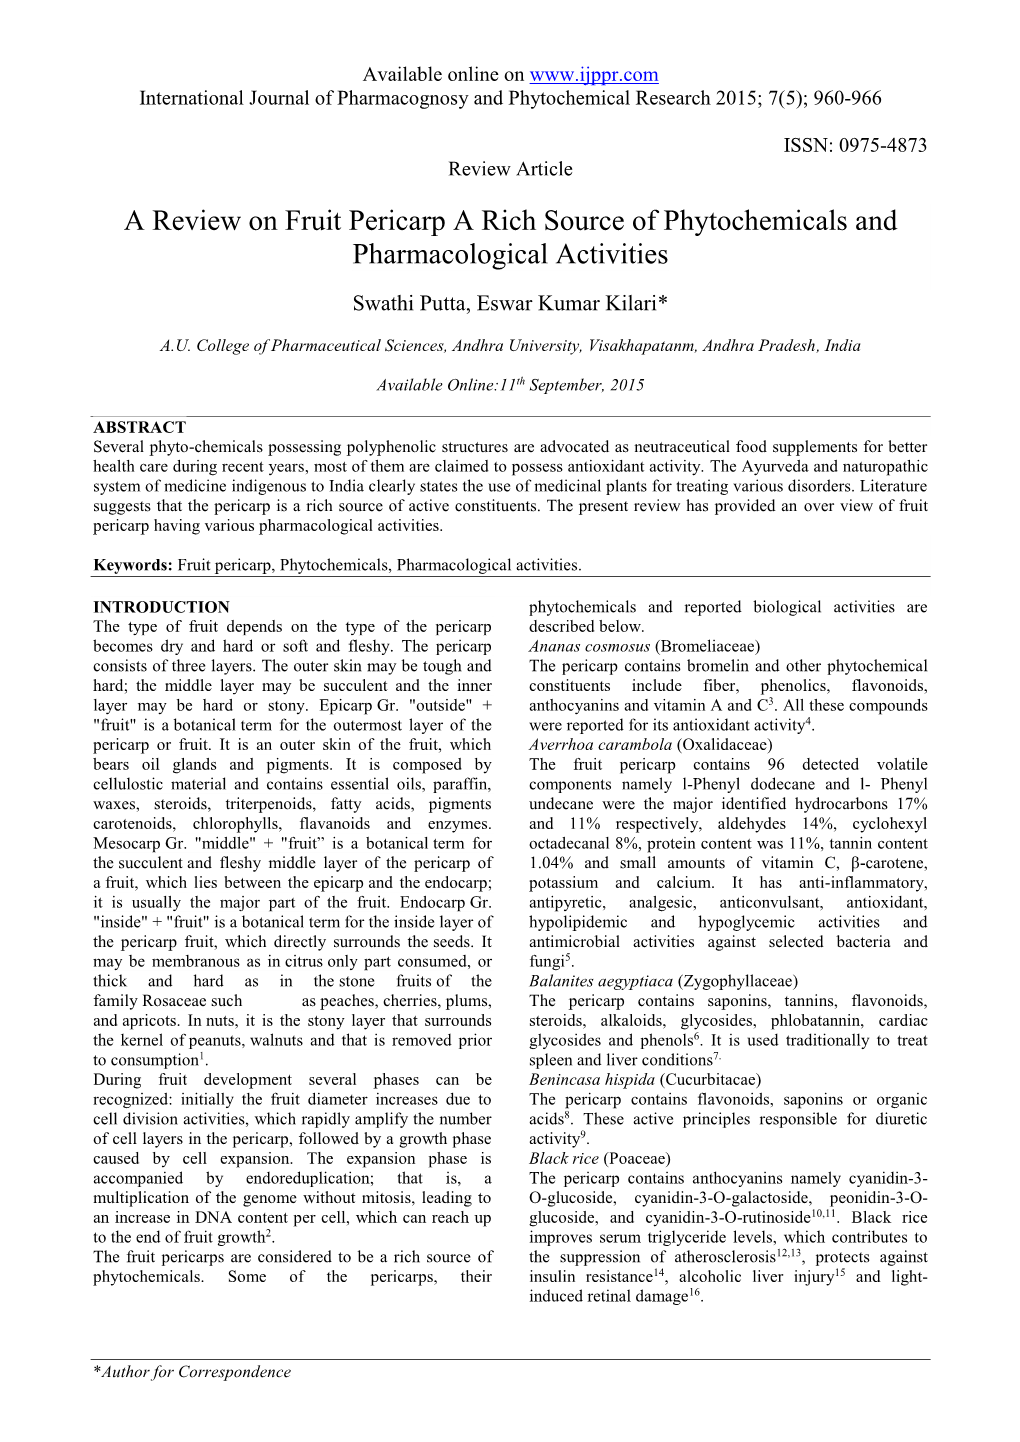 A Review on Fruit Pericarp a Rich Source of Phytochemicals and Pharmacological Activities